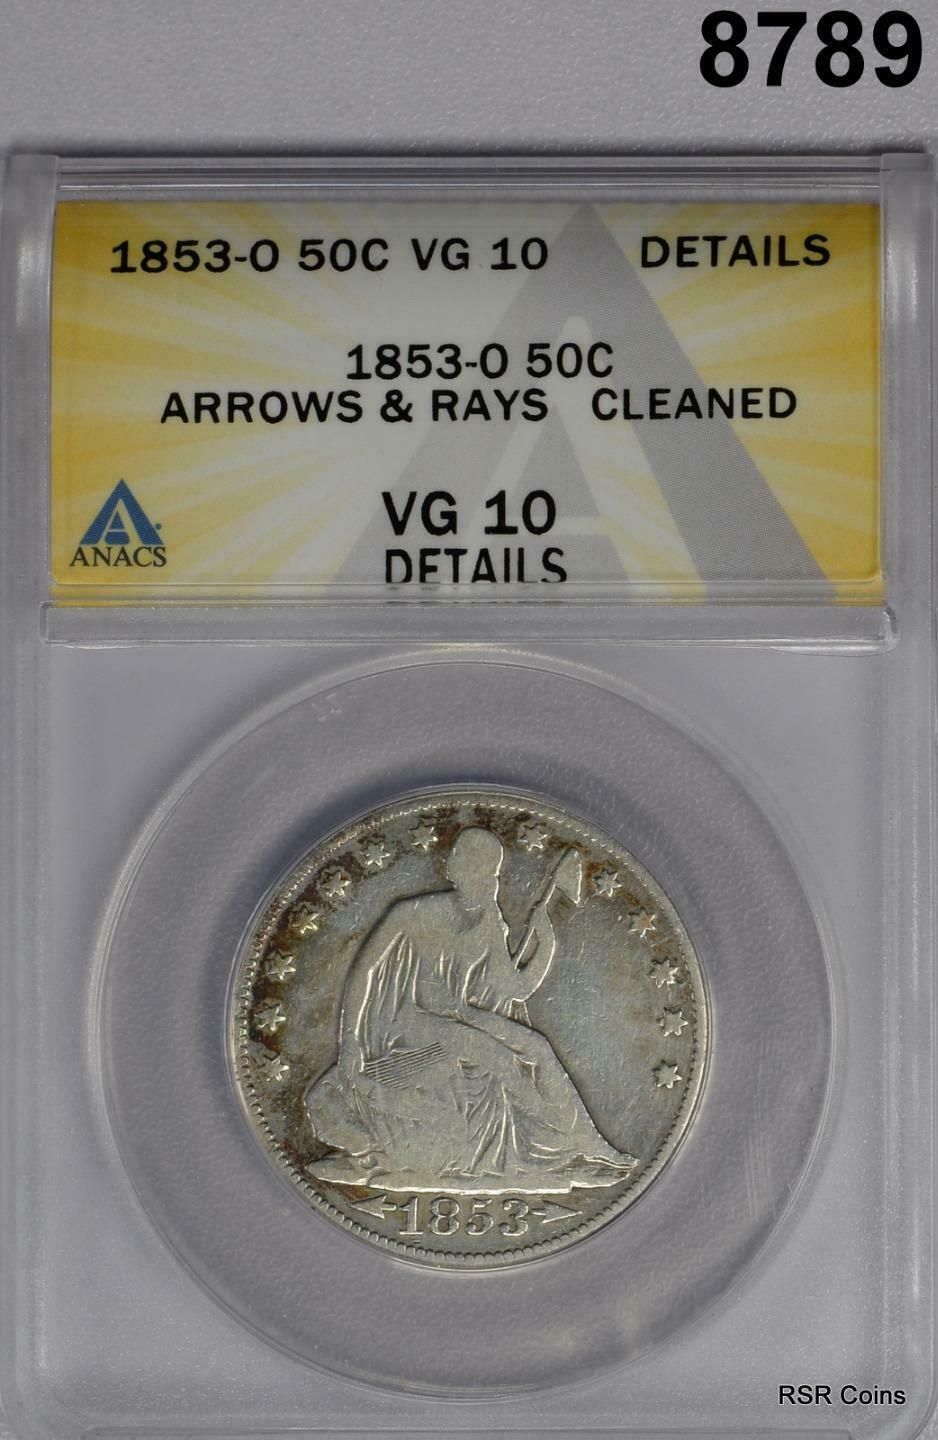 1853 O SEATED HALF DOLLAR ARROWS & RAYS ANACS CERTIFIED VG10 CLEANED #8789